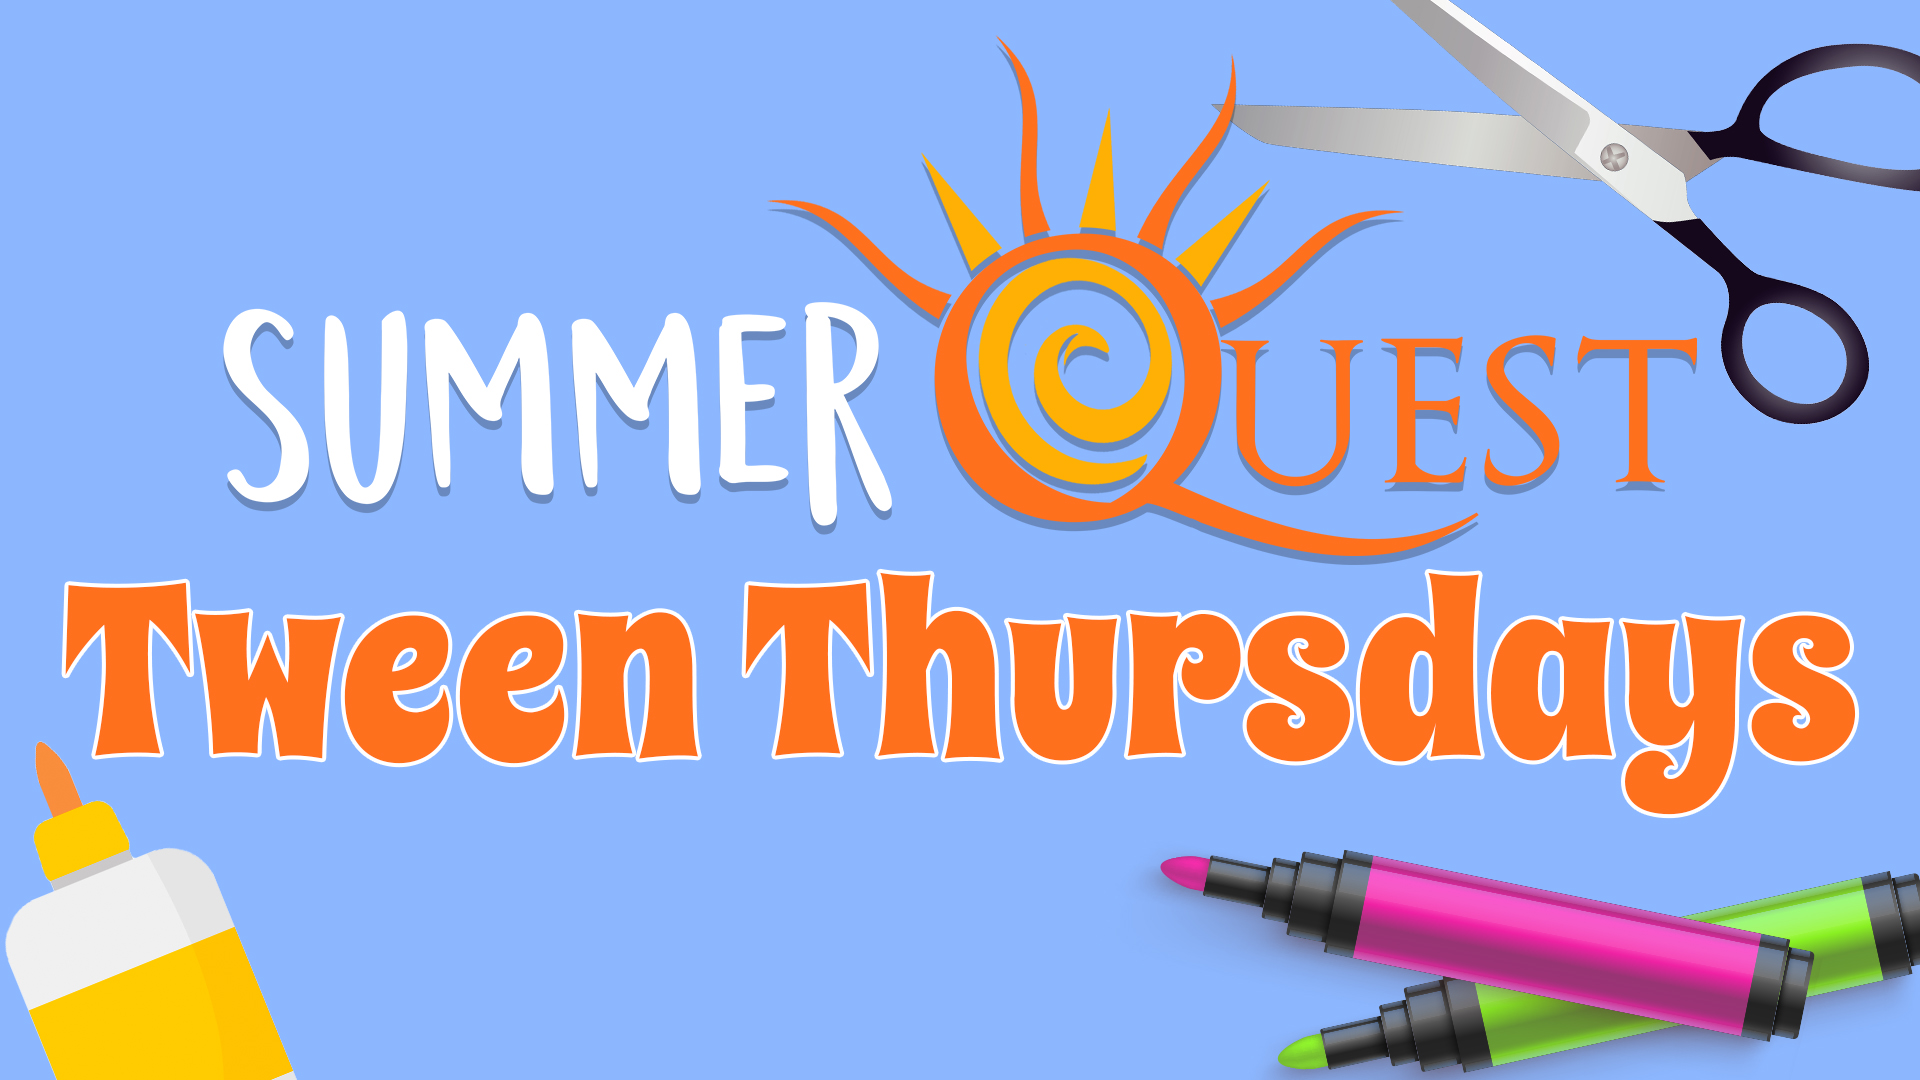 Image reads "SummerQuest Tween Tuesdays" against a blue background. Crafting supplies are scattered among the image.